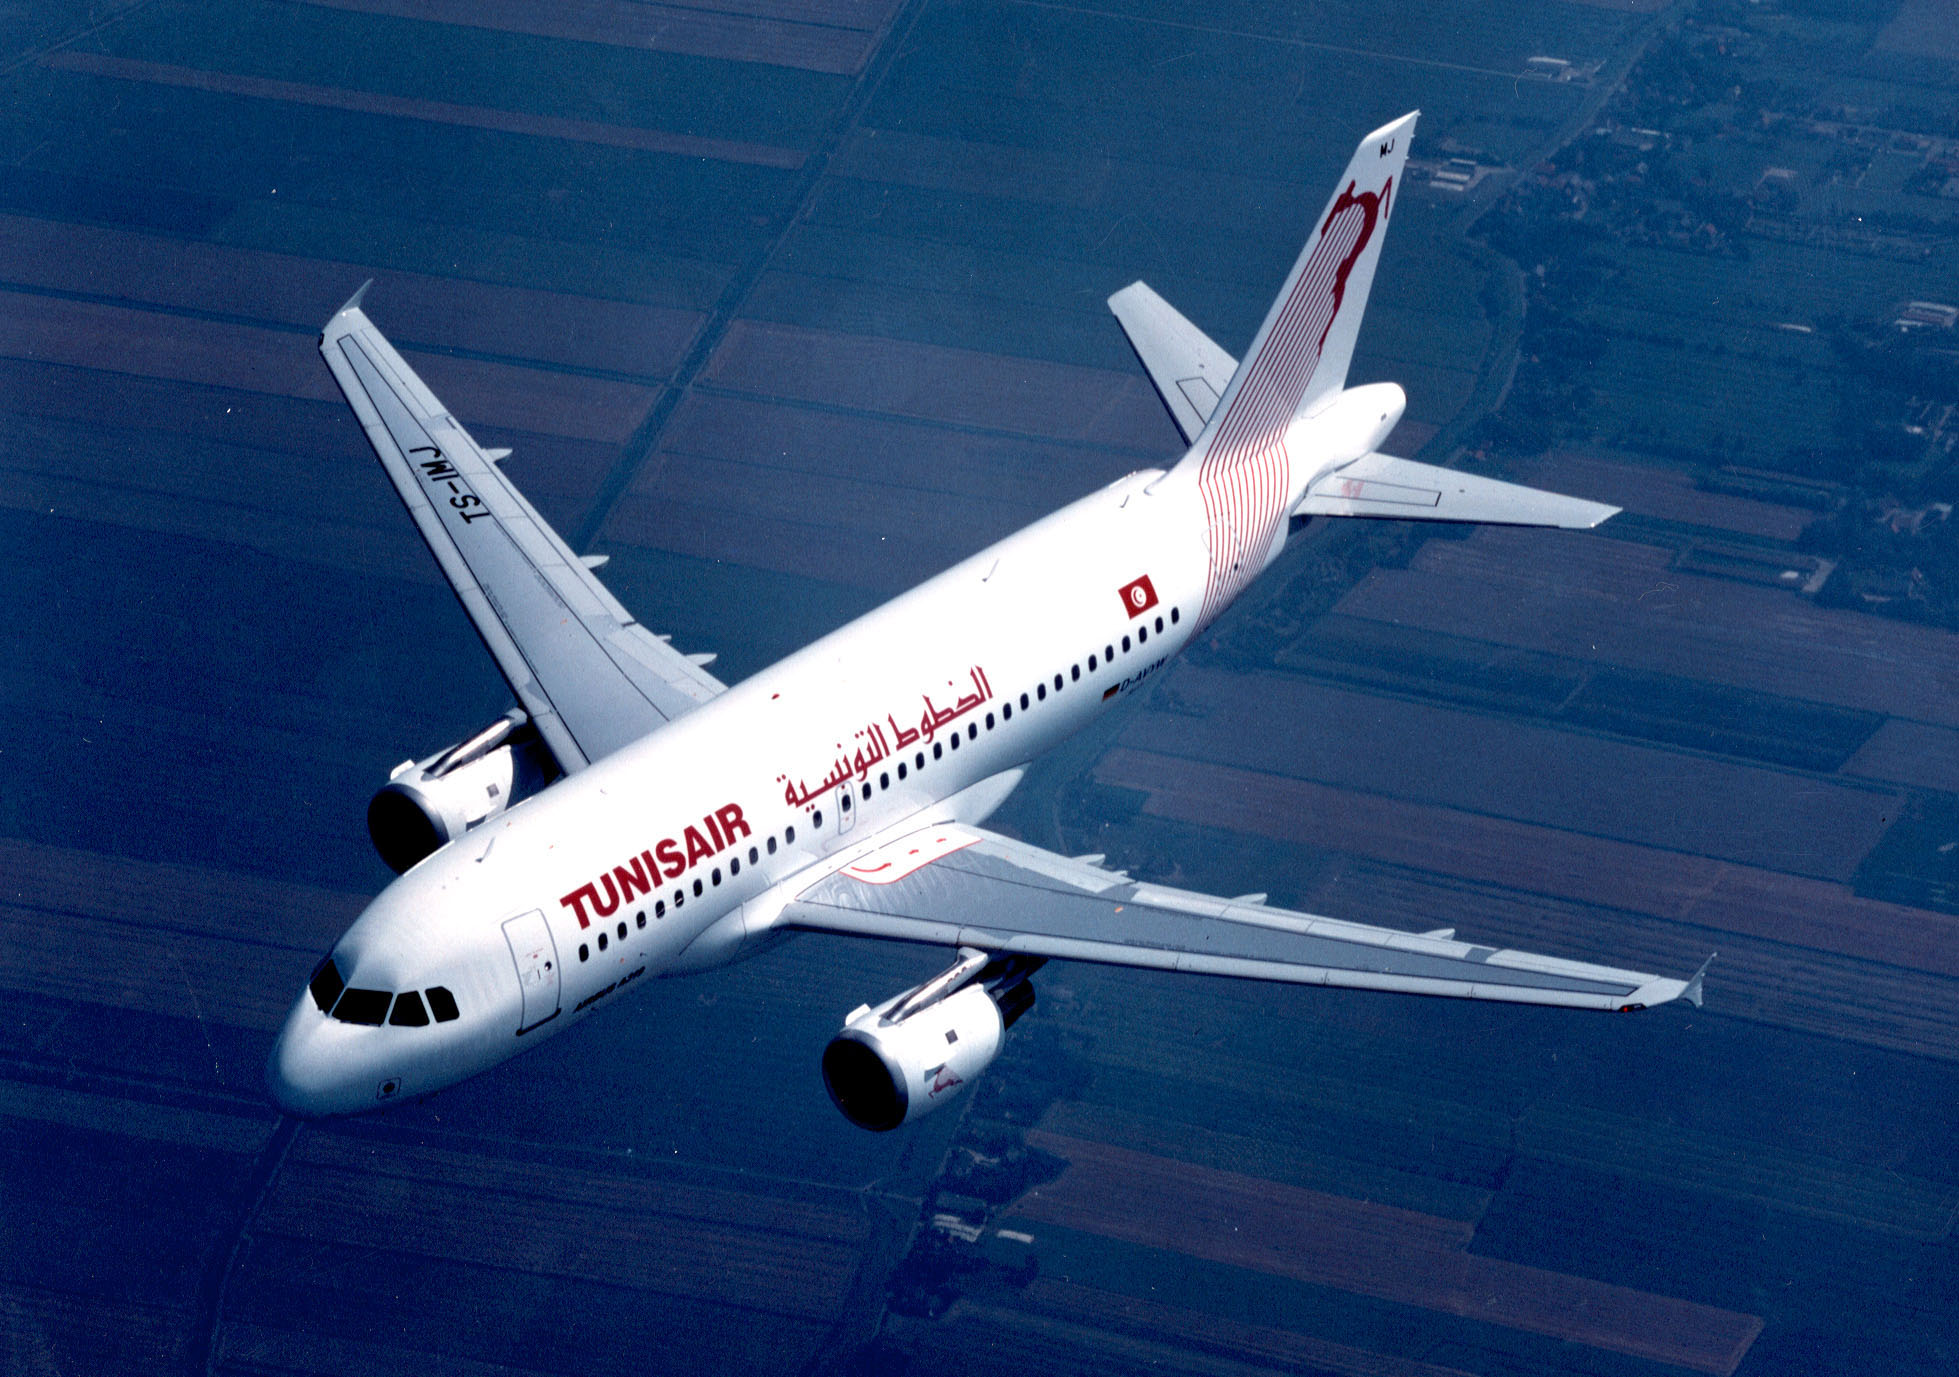 Tunisair debunks rumors about seizure of its aircraft in Munich